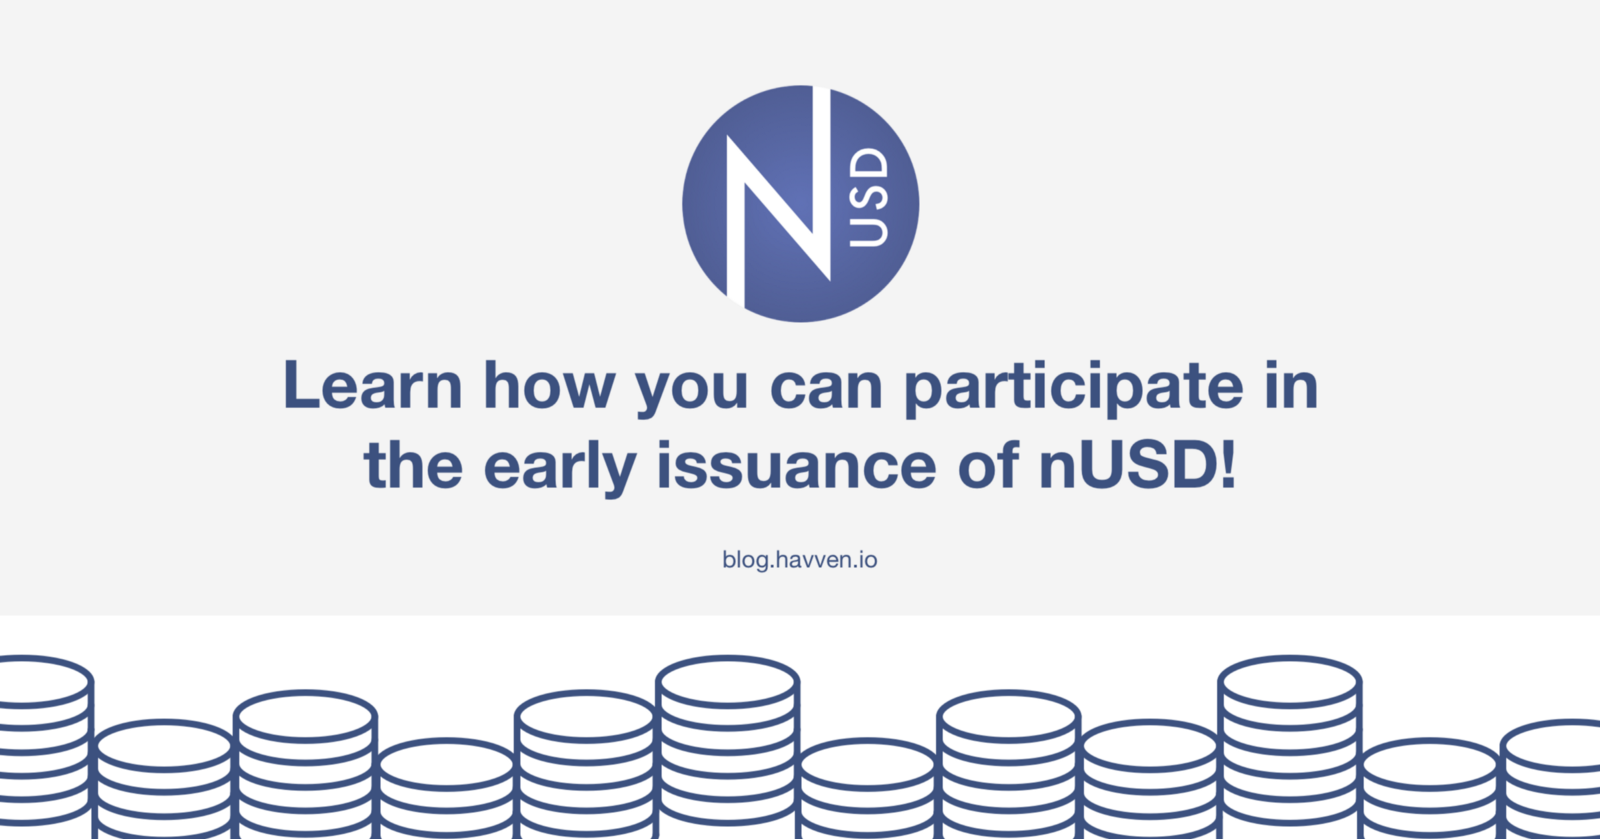 Early issuance of nUSD